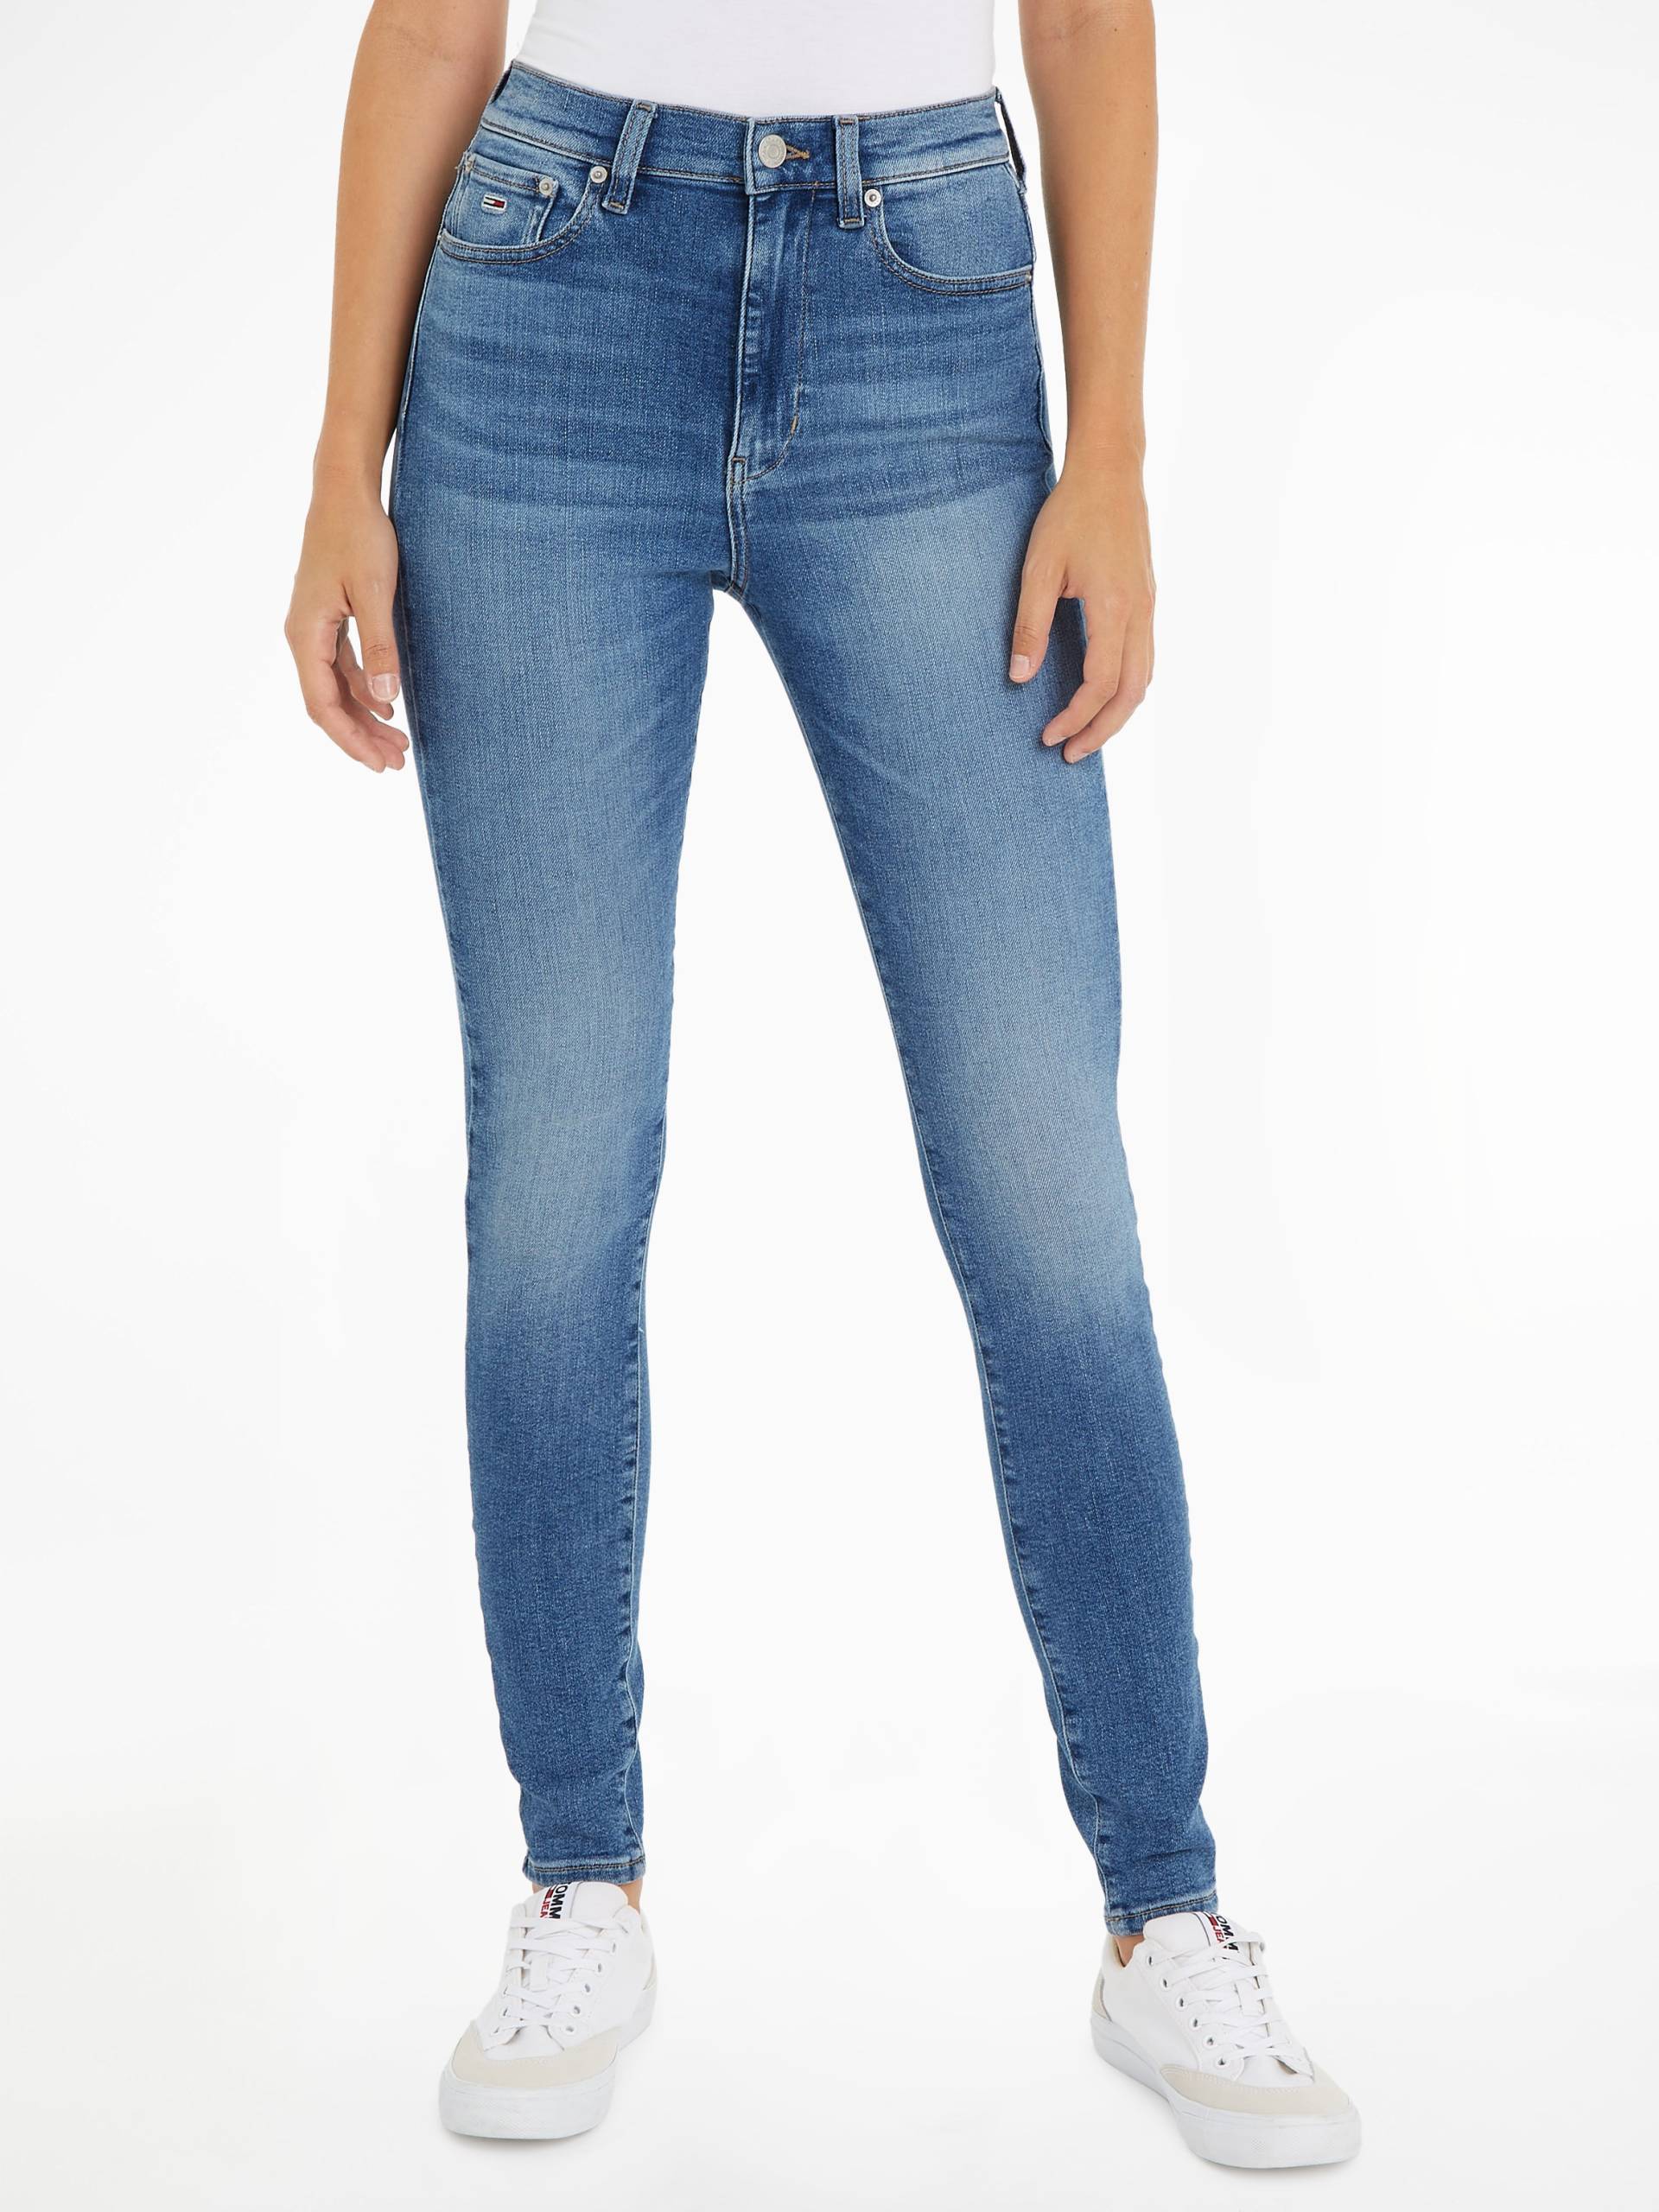 Tommy Jeans Bequeme Jeans »Sylvia Skinny Slim Jeans Hohe Leibhöhe« von Tommy Jeans